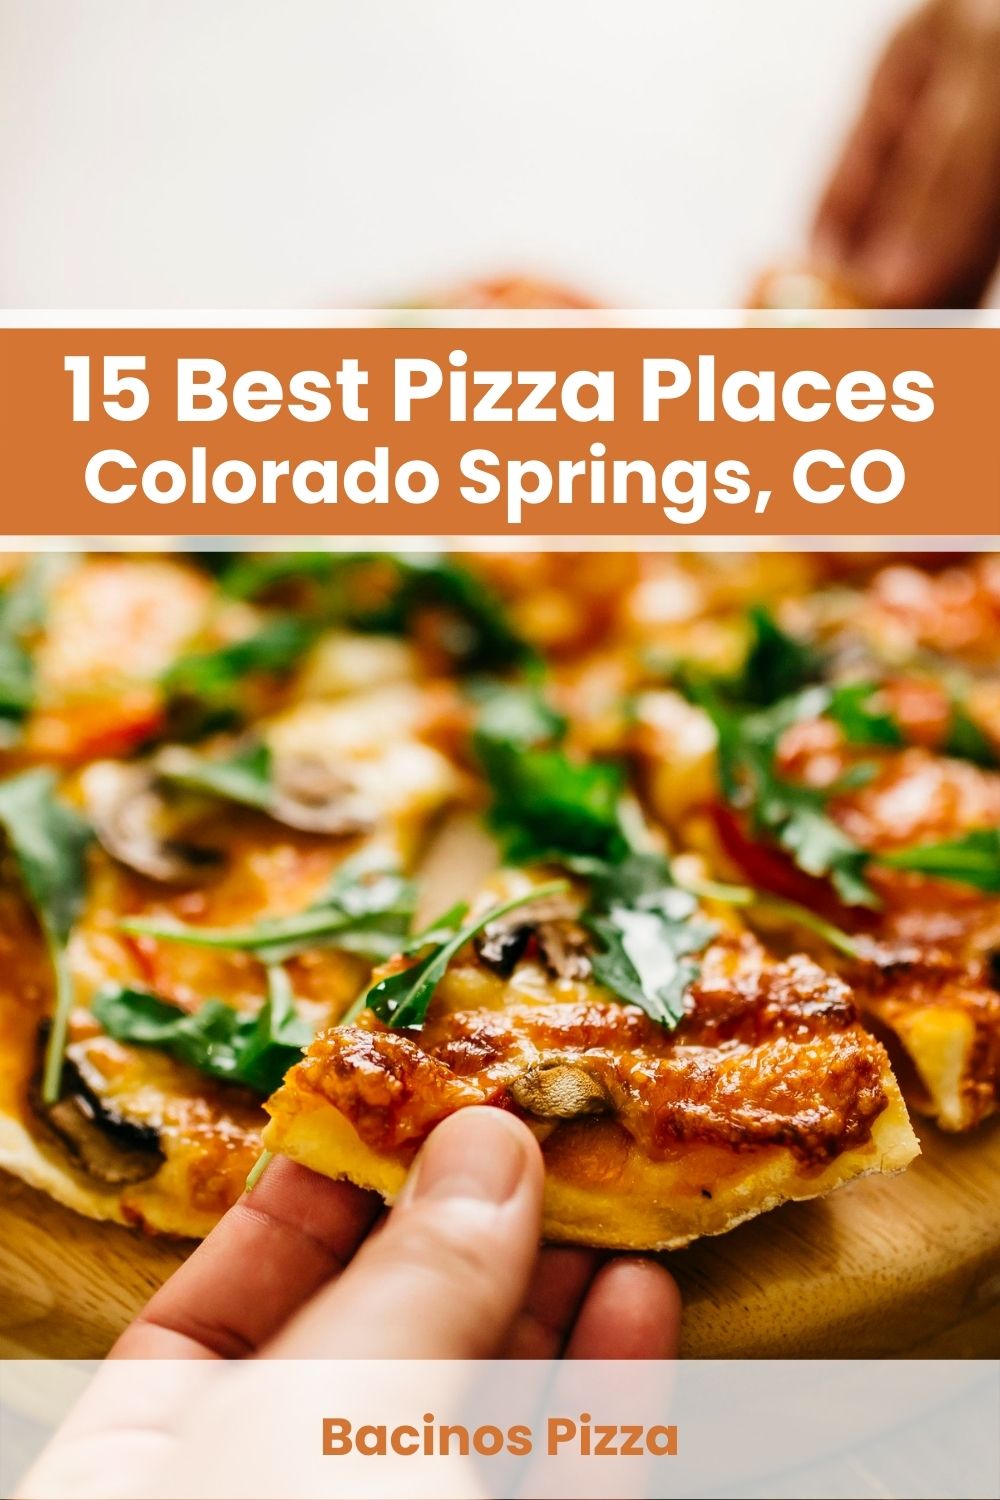 Best Pizza Places in Colorado Springs, CO